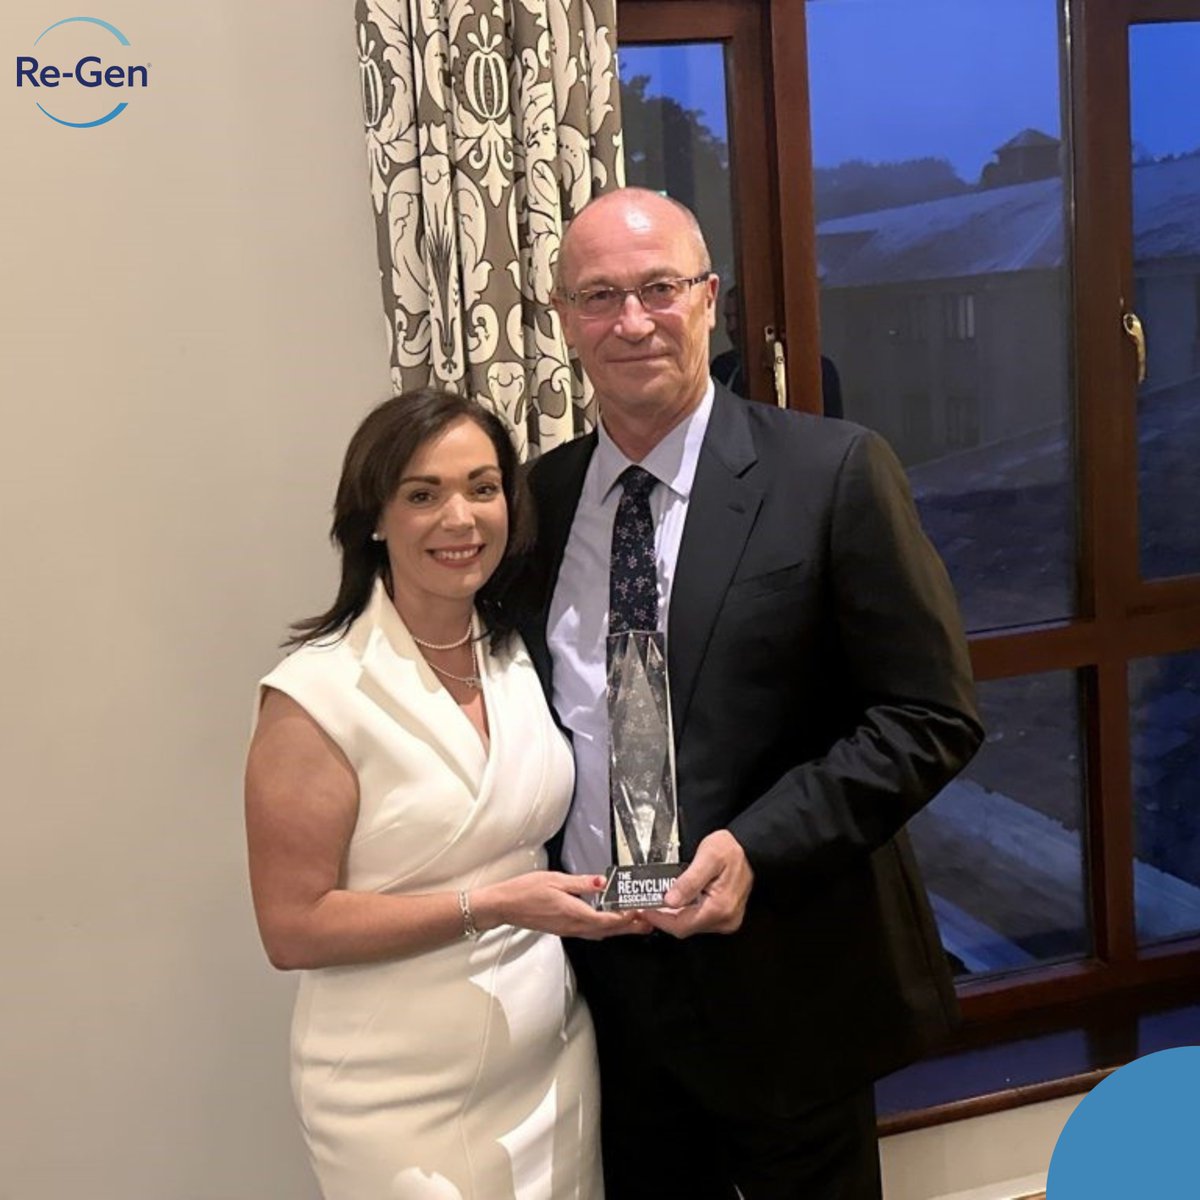 Congratulations to our Commercial Director, Celine Grant, on her new role as President of The Recycling Association!♻️
We're incredibly proud of Celine and her ongoing commitment to excellence in the industry. 👏
#regen #therecyclingassociation #innovation #recycling